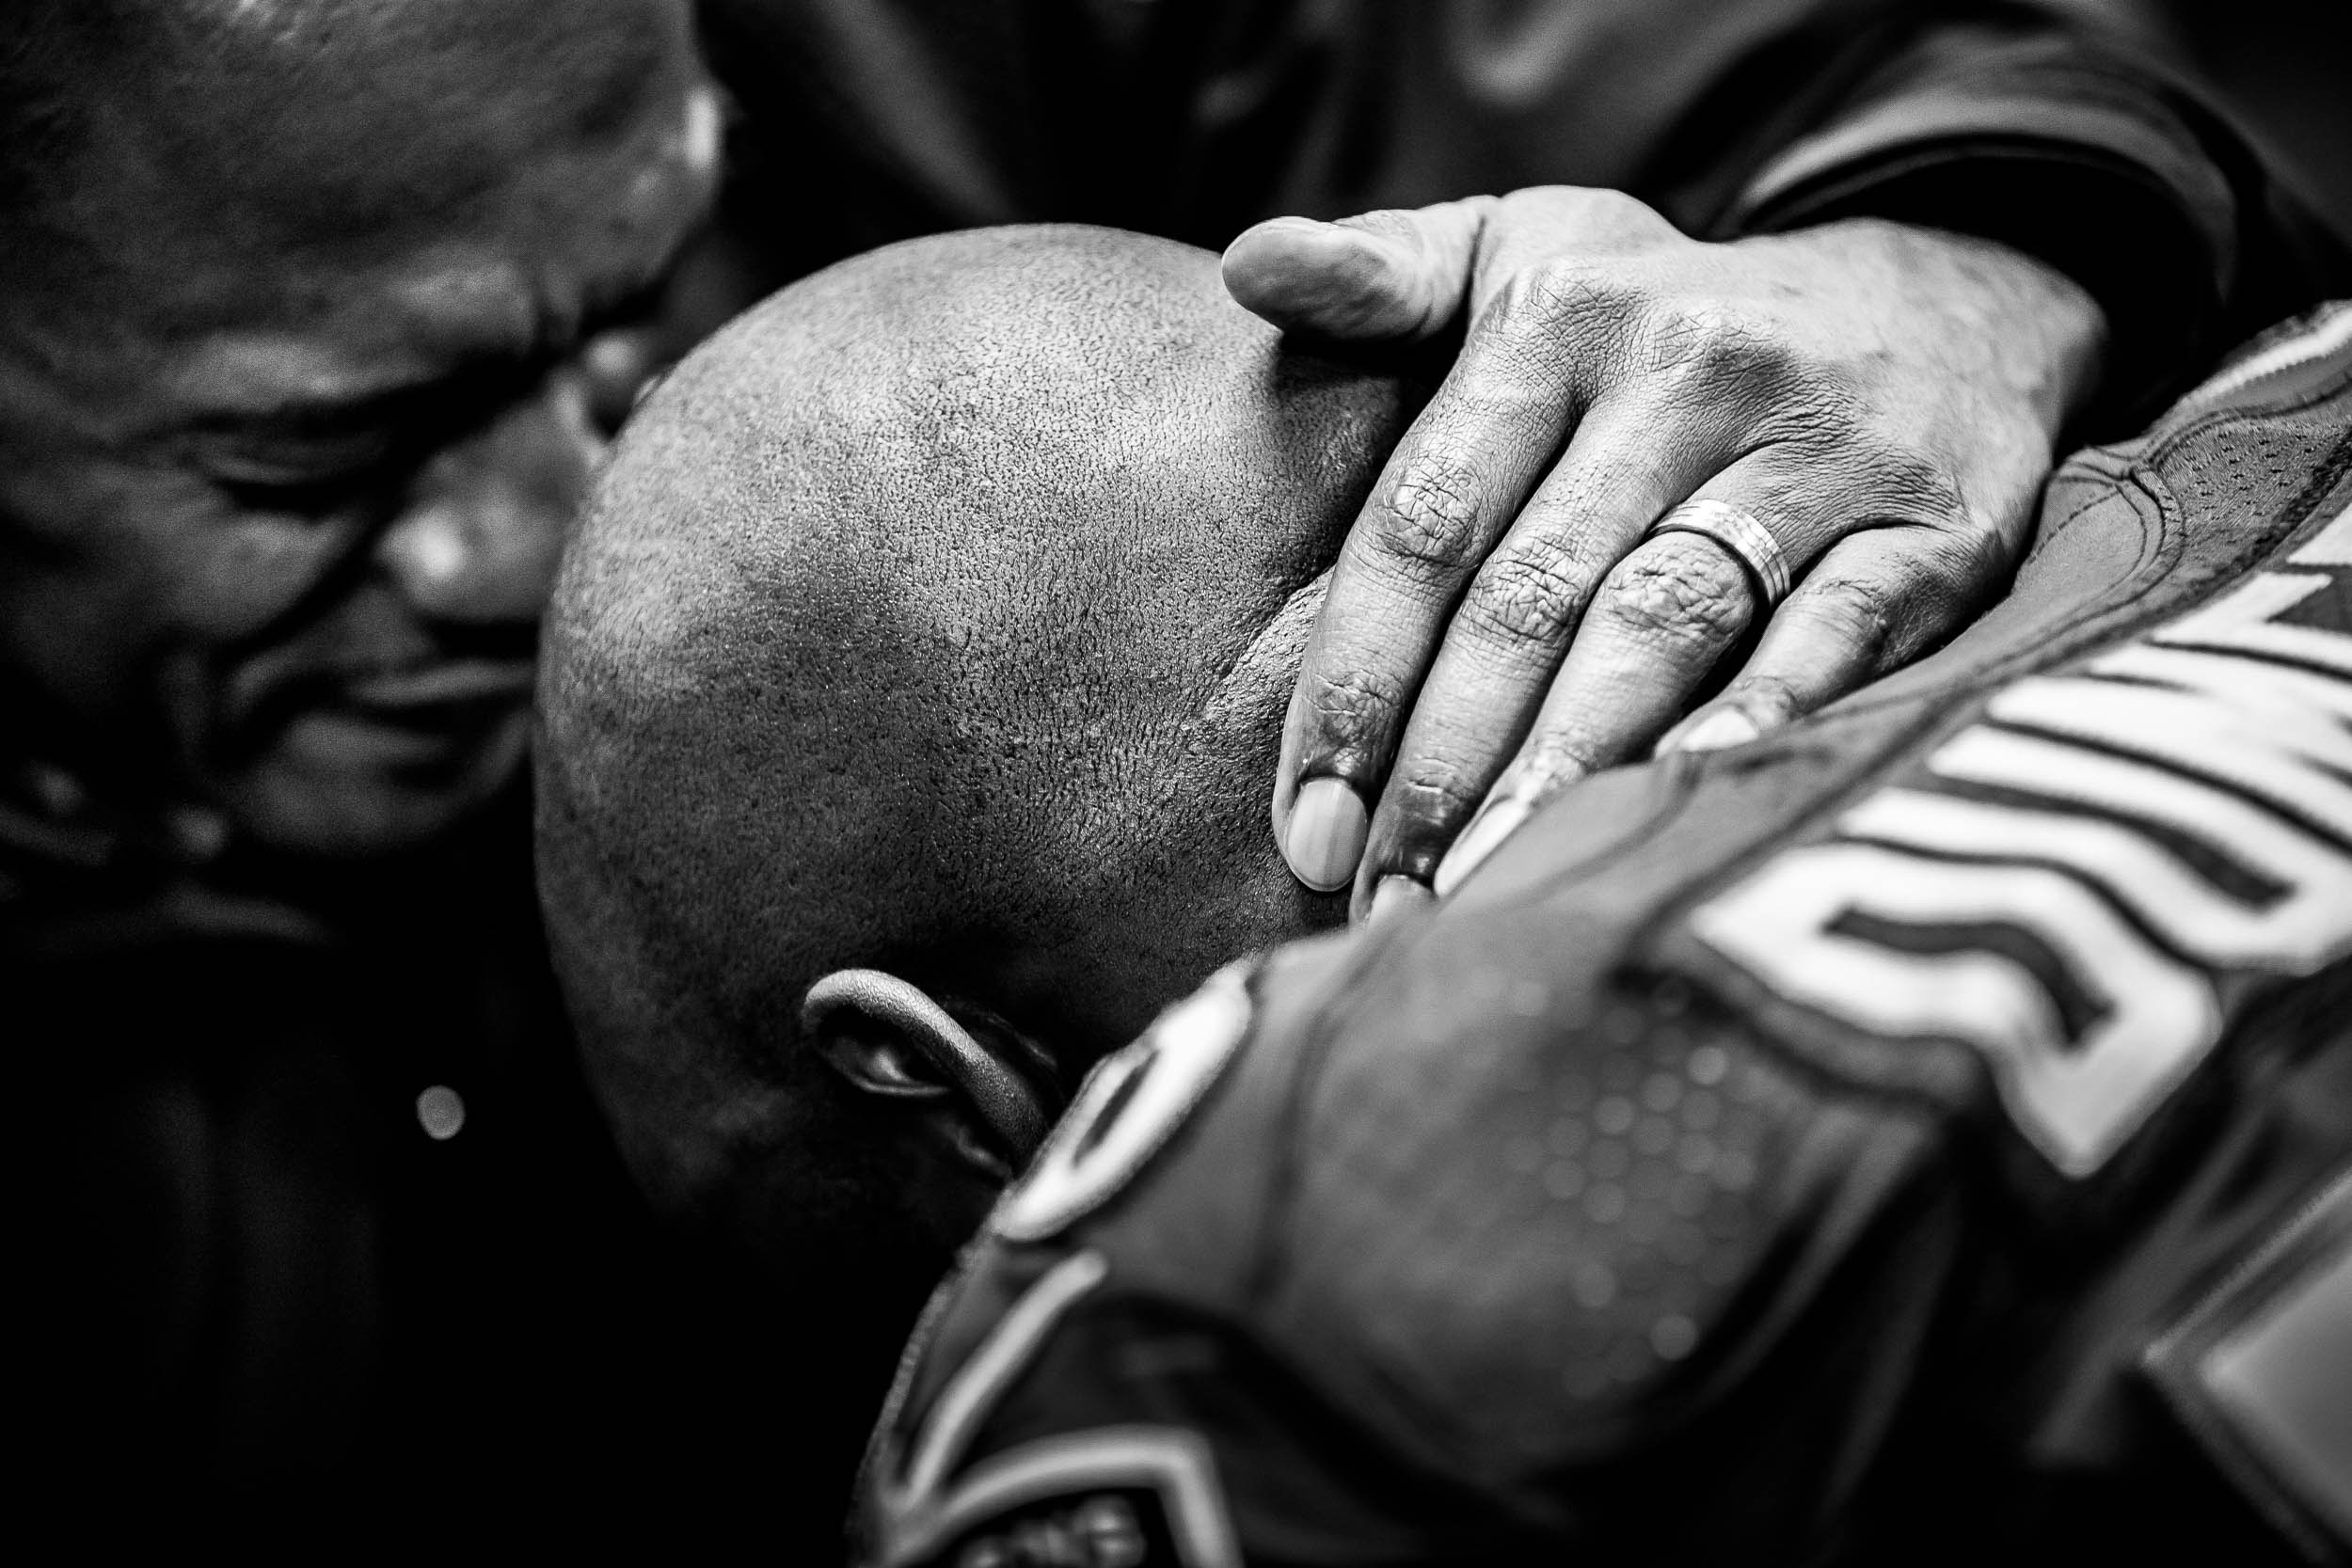 NFL BEHIND THE SCENES DOCUMENTARY PHOTOGRAPHER ESPN HBO SPORTS DOCUMENTARY PHOTOGRAPHY EDITORIAL AND REPORTAGE PHOTOGRAPHER BASED ON EAST COAST